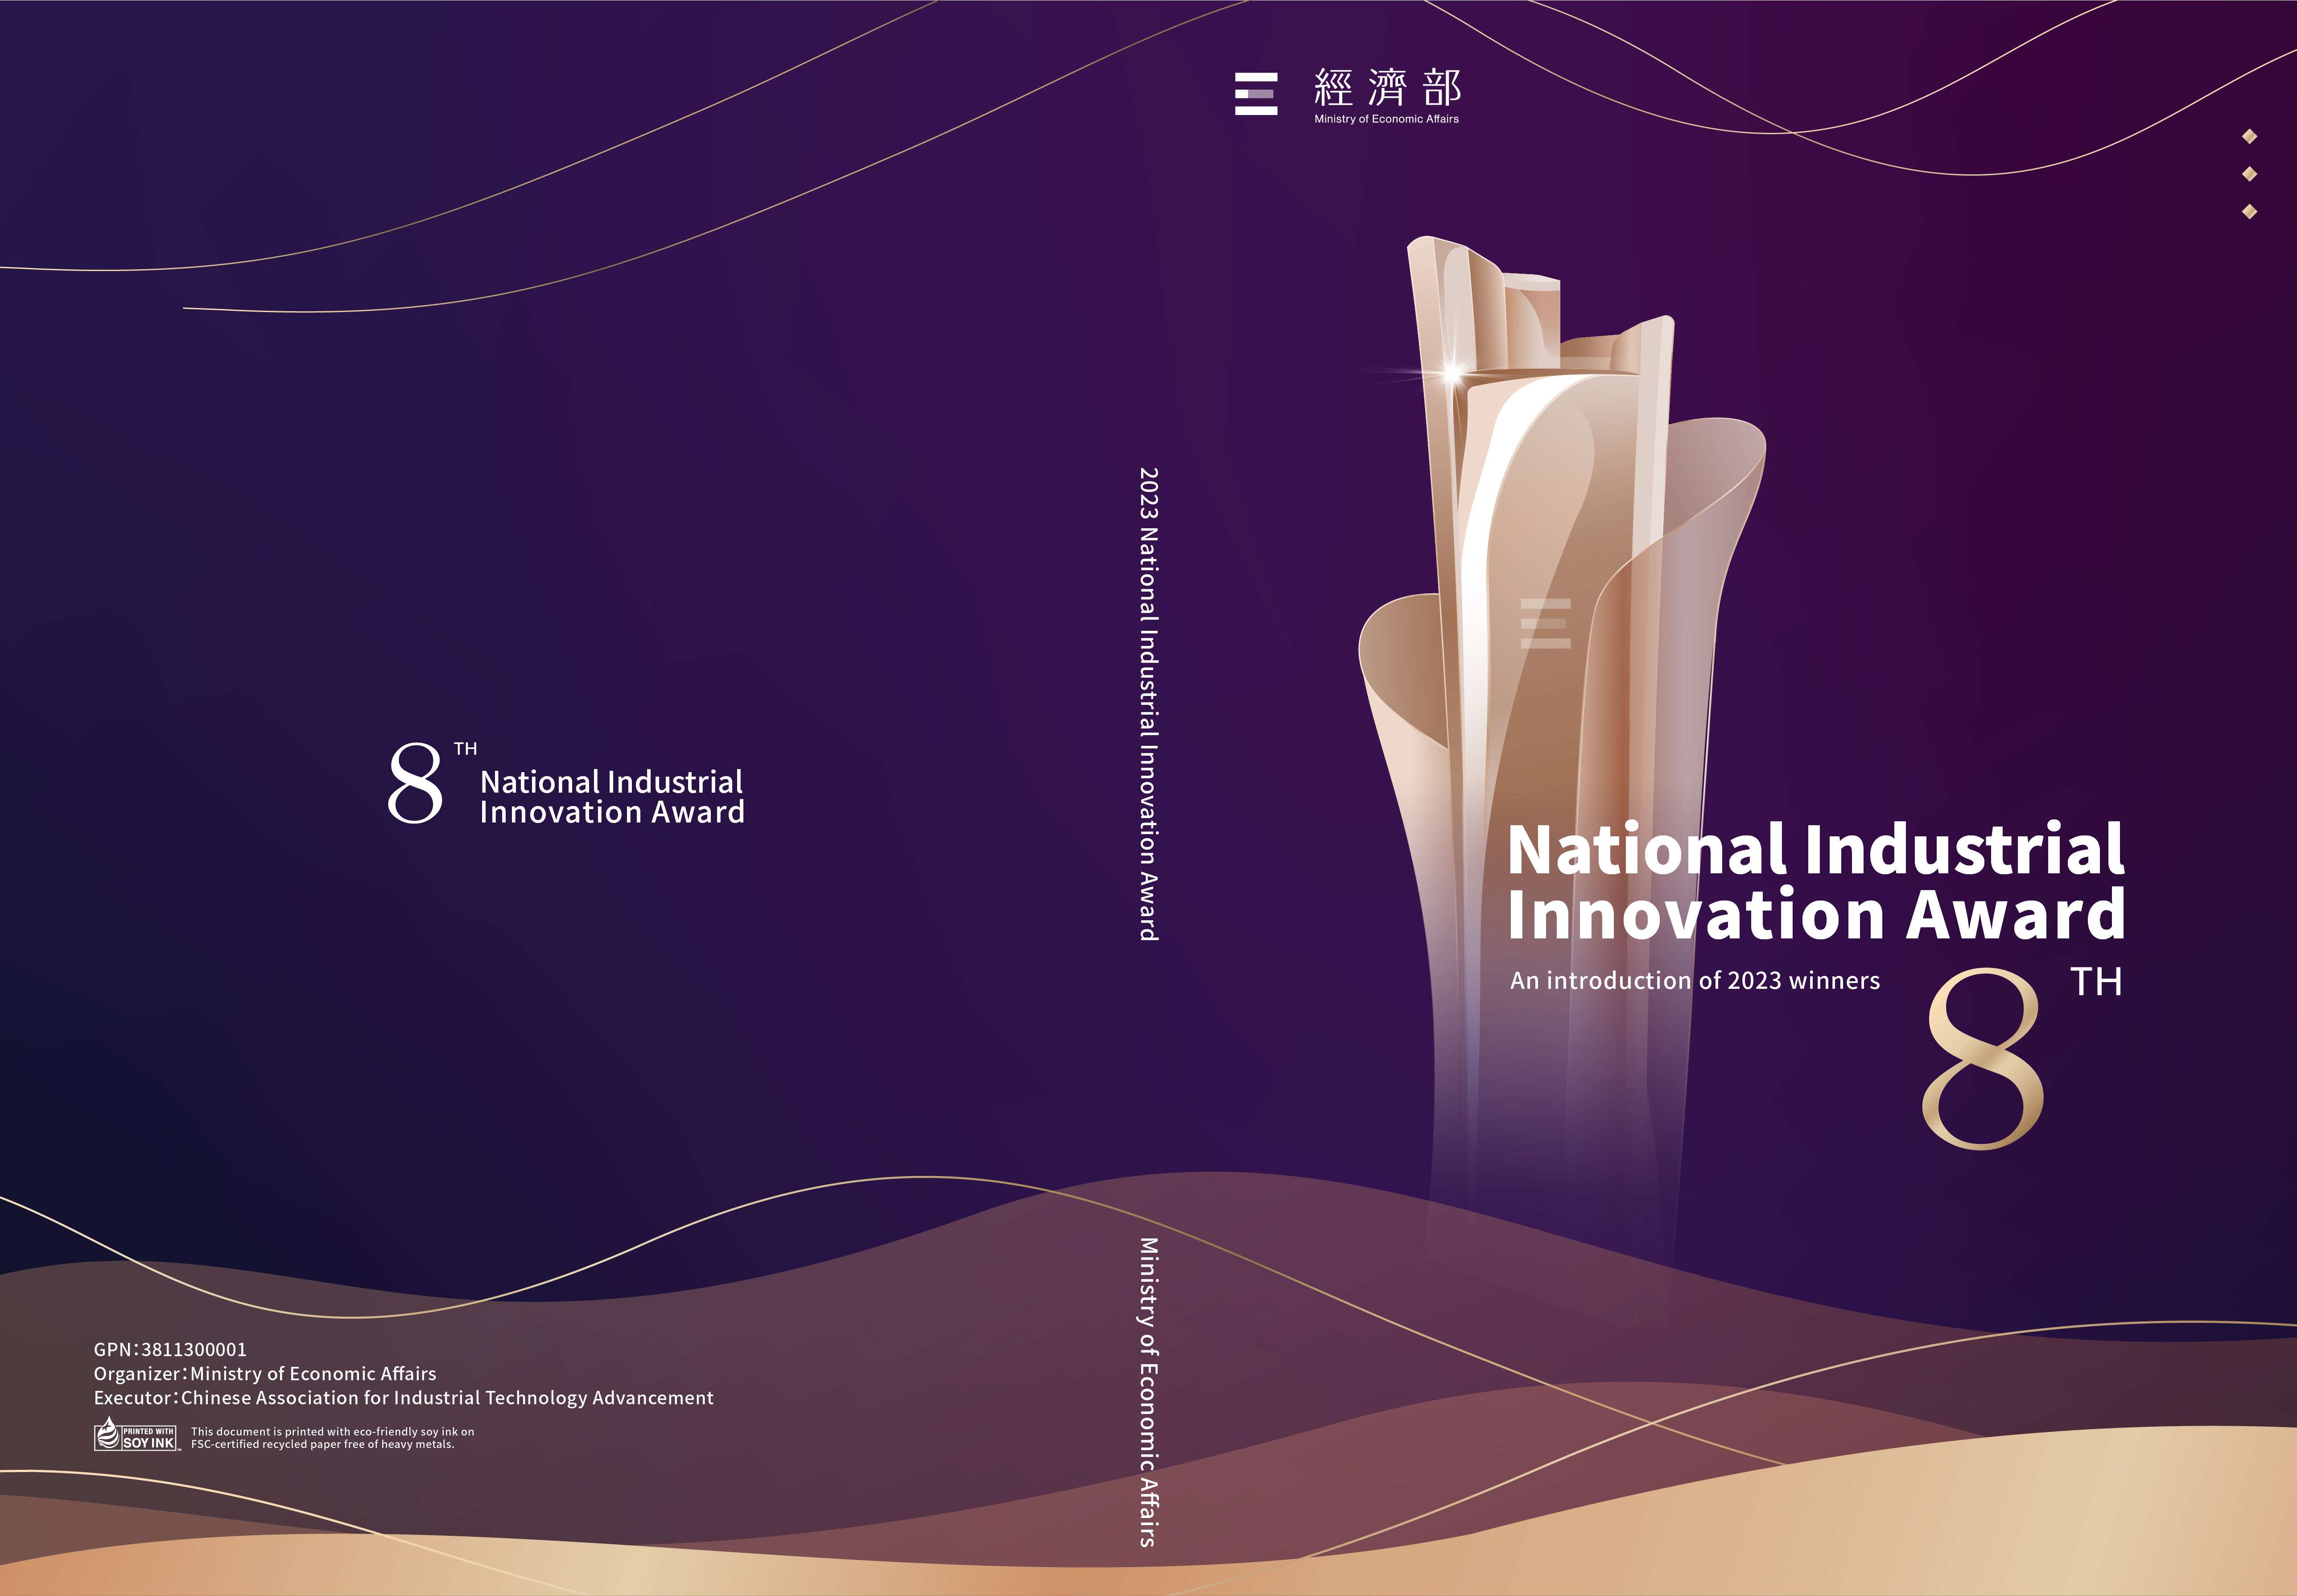 8th National Industrial Innovation Award – An introduction of 2023 winners